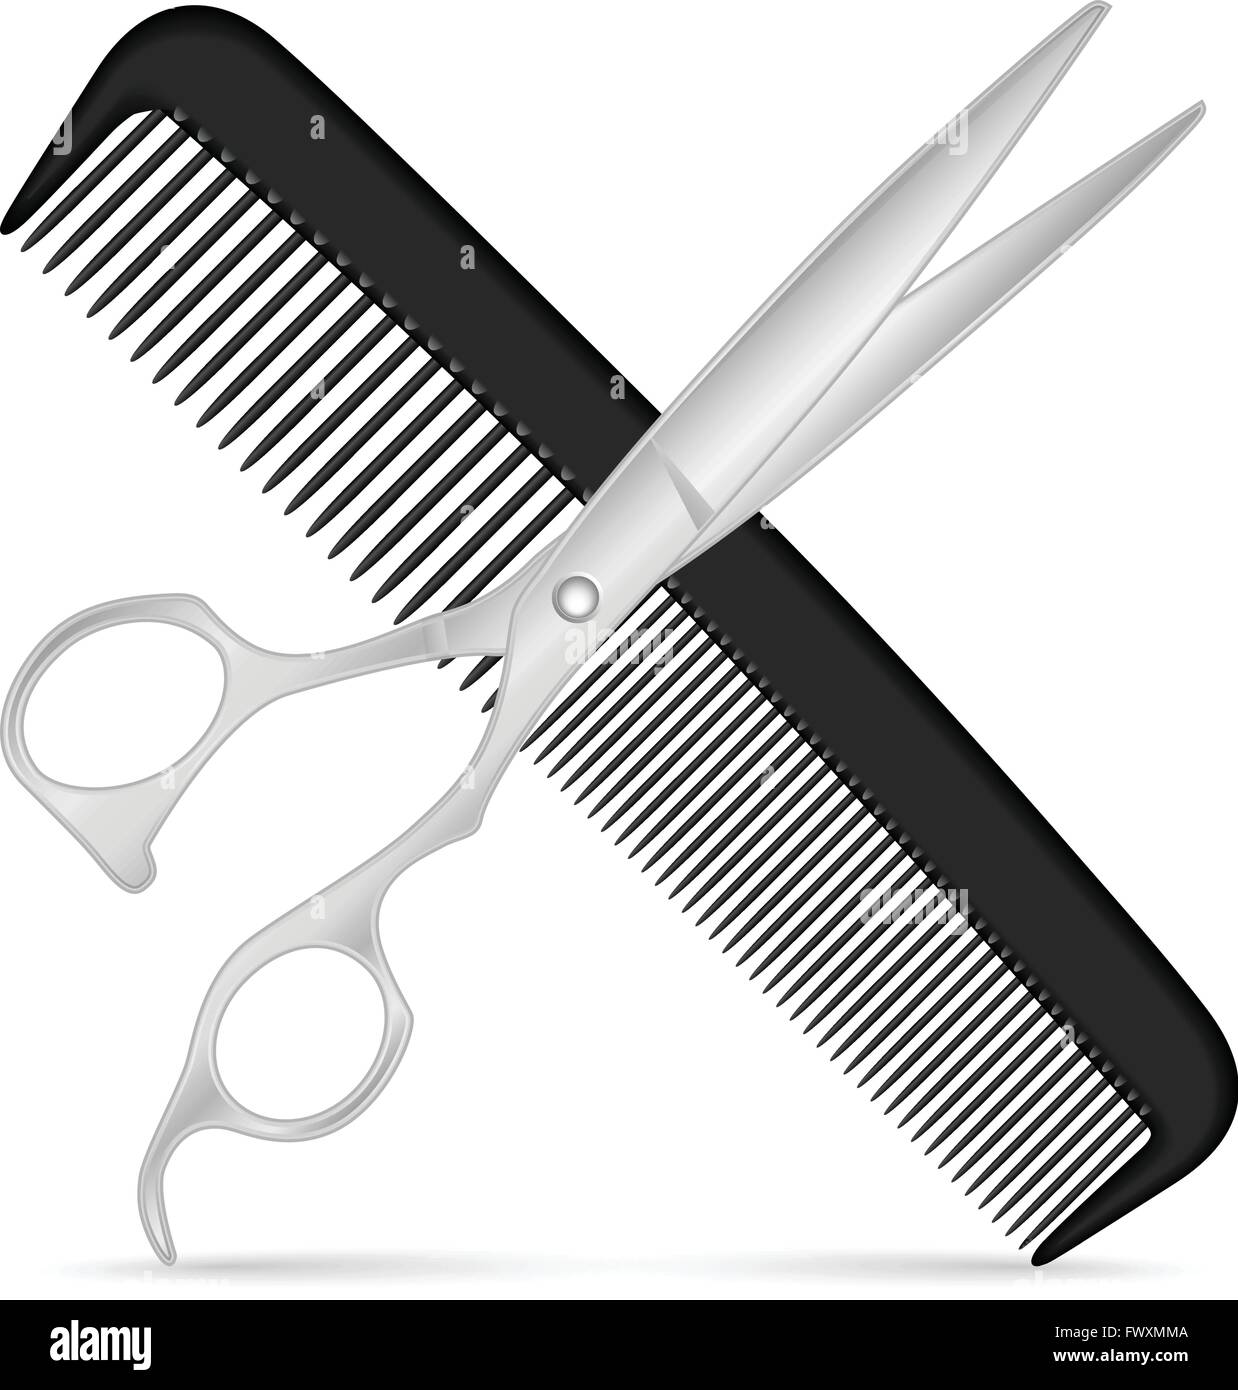 Comb and scissors icon on a white background. Stock Vector